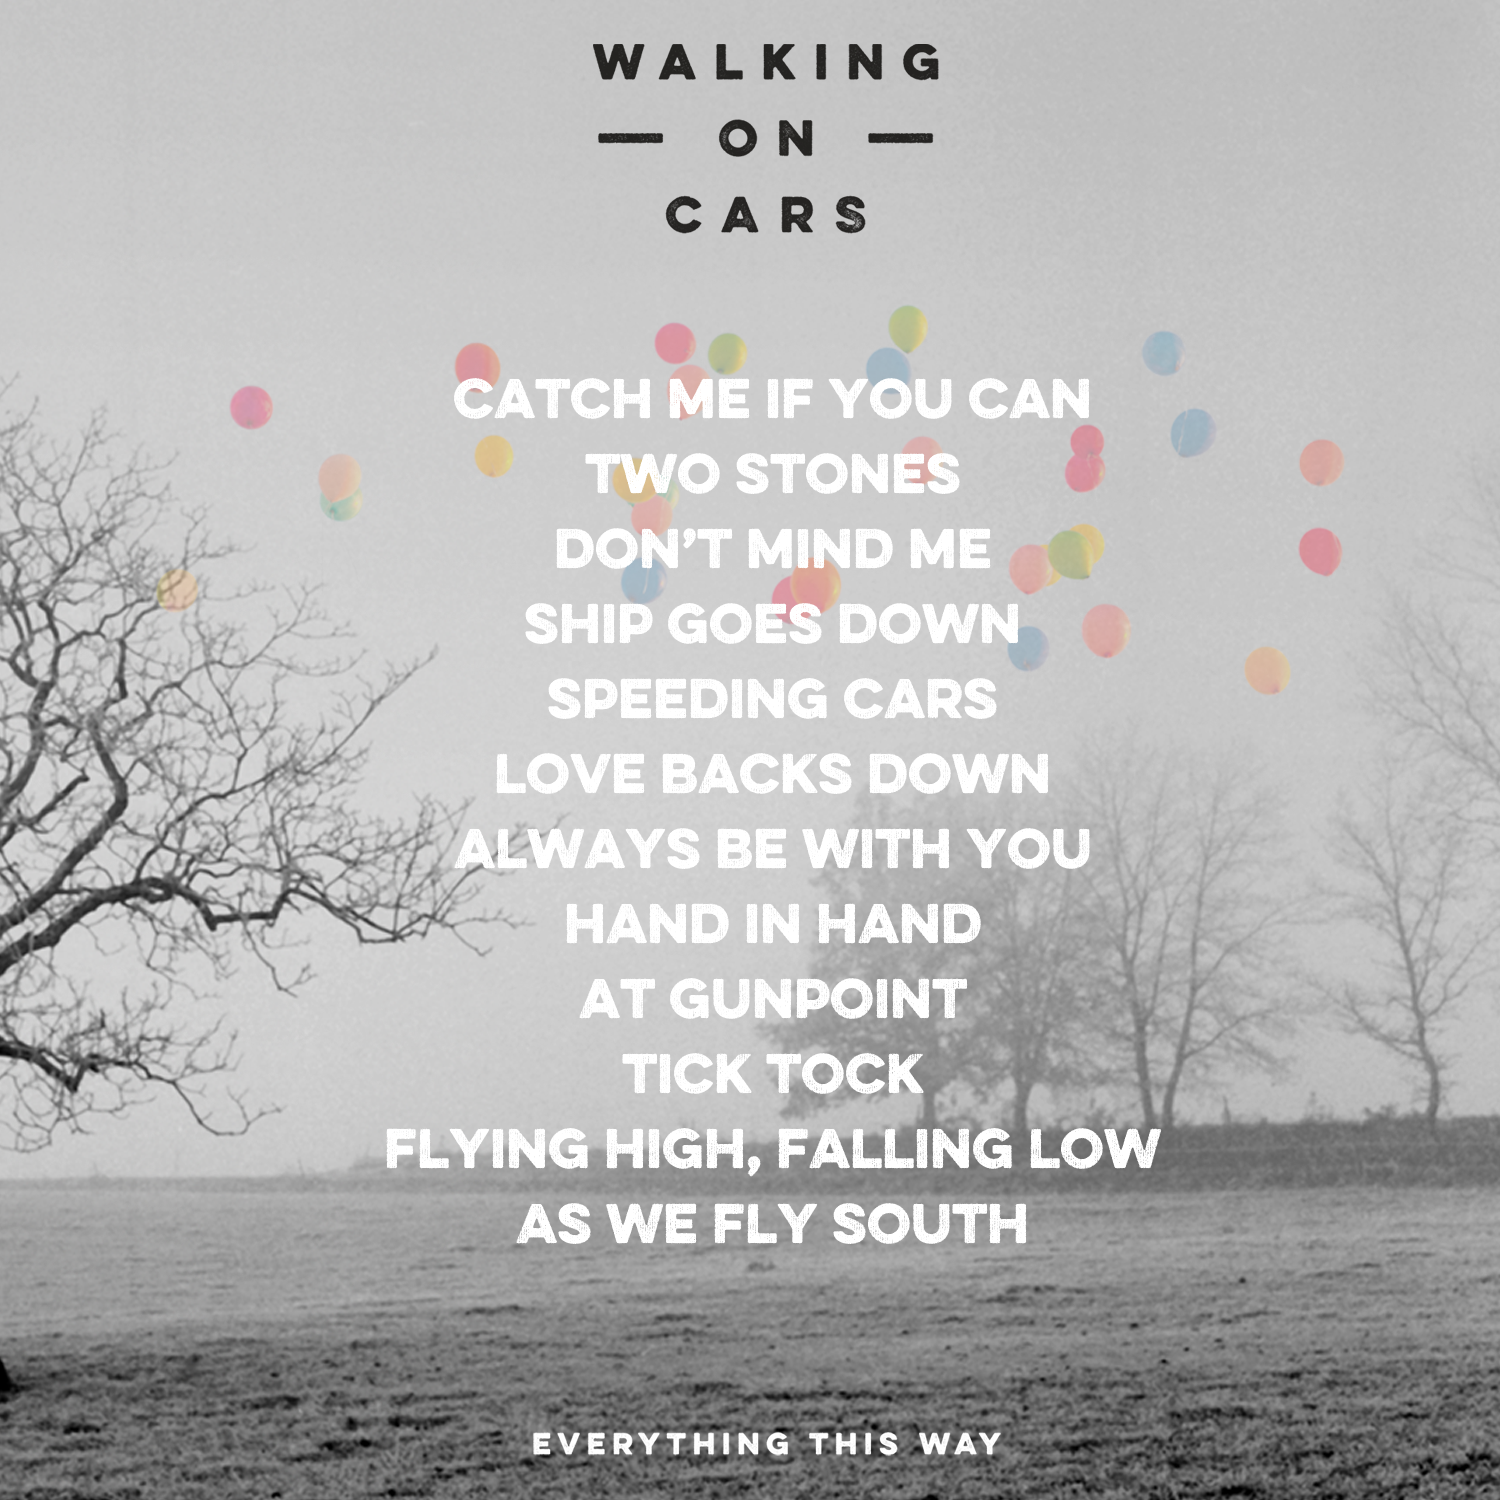 walking on cars itunes